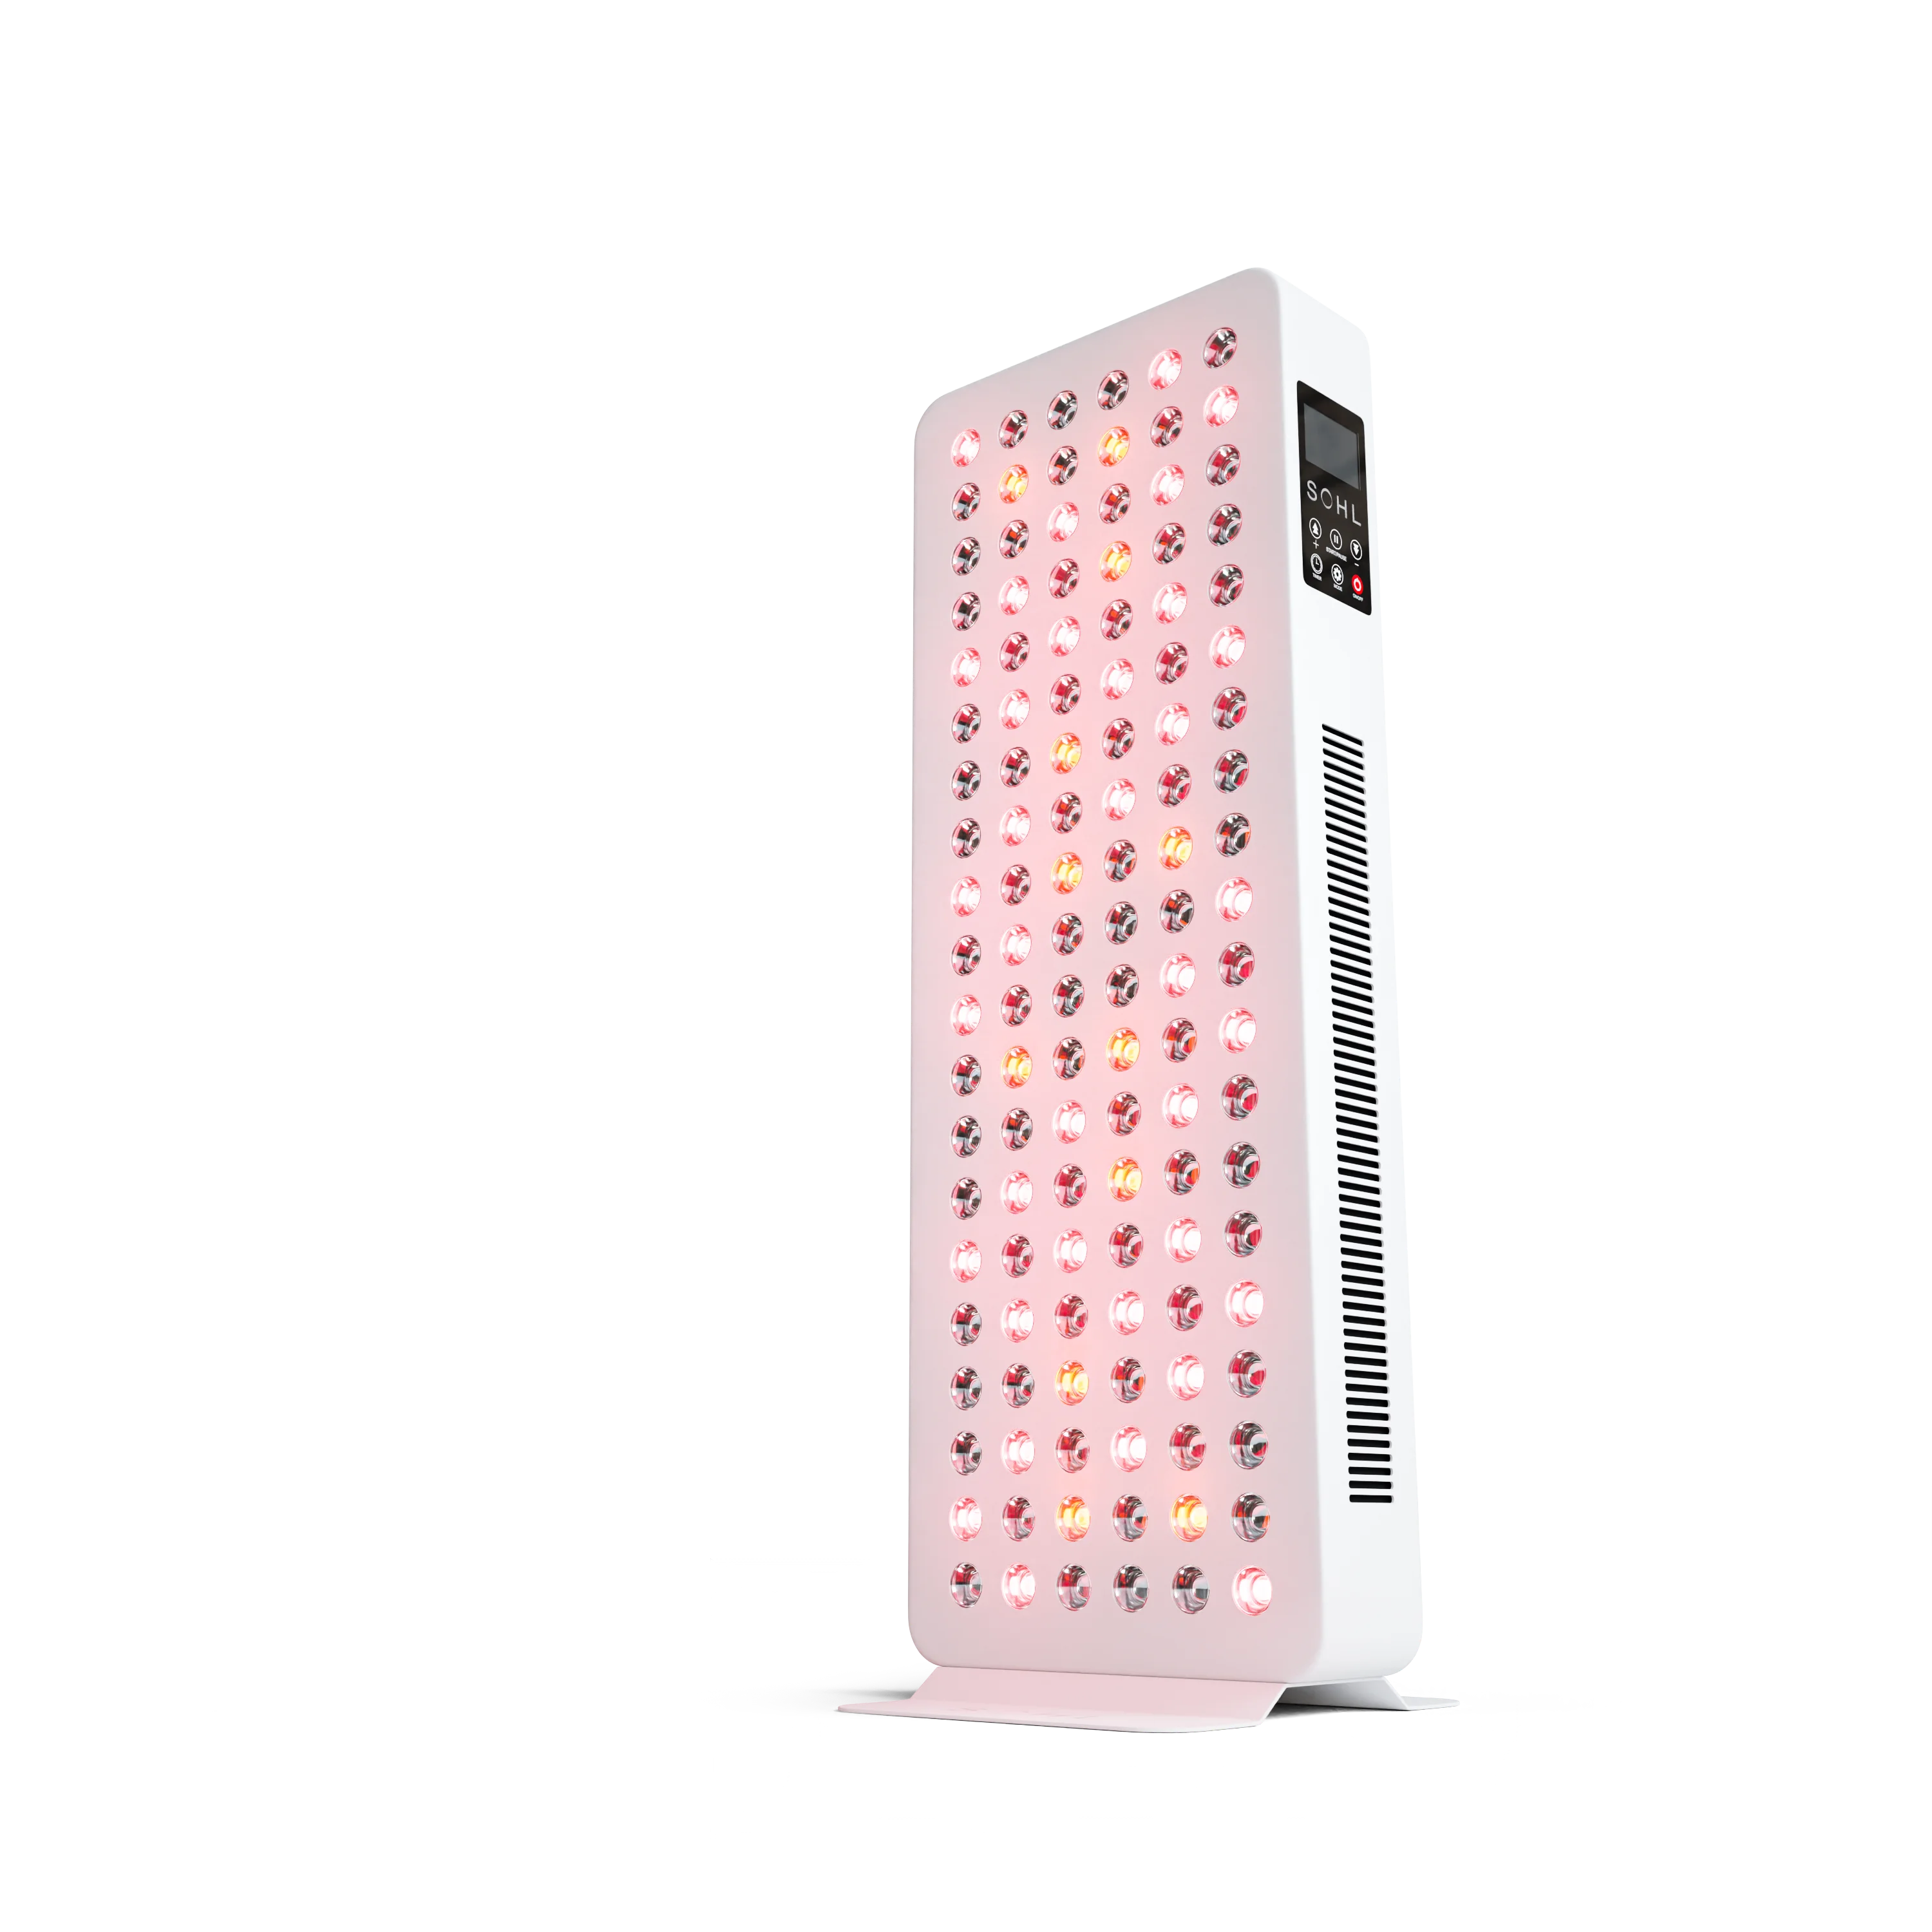 SOHL LITE Red Light Therapy Panel